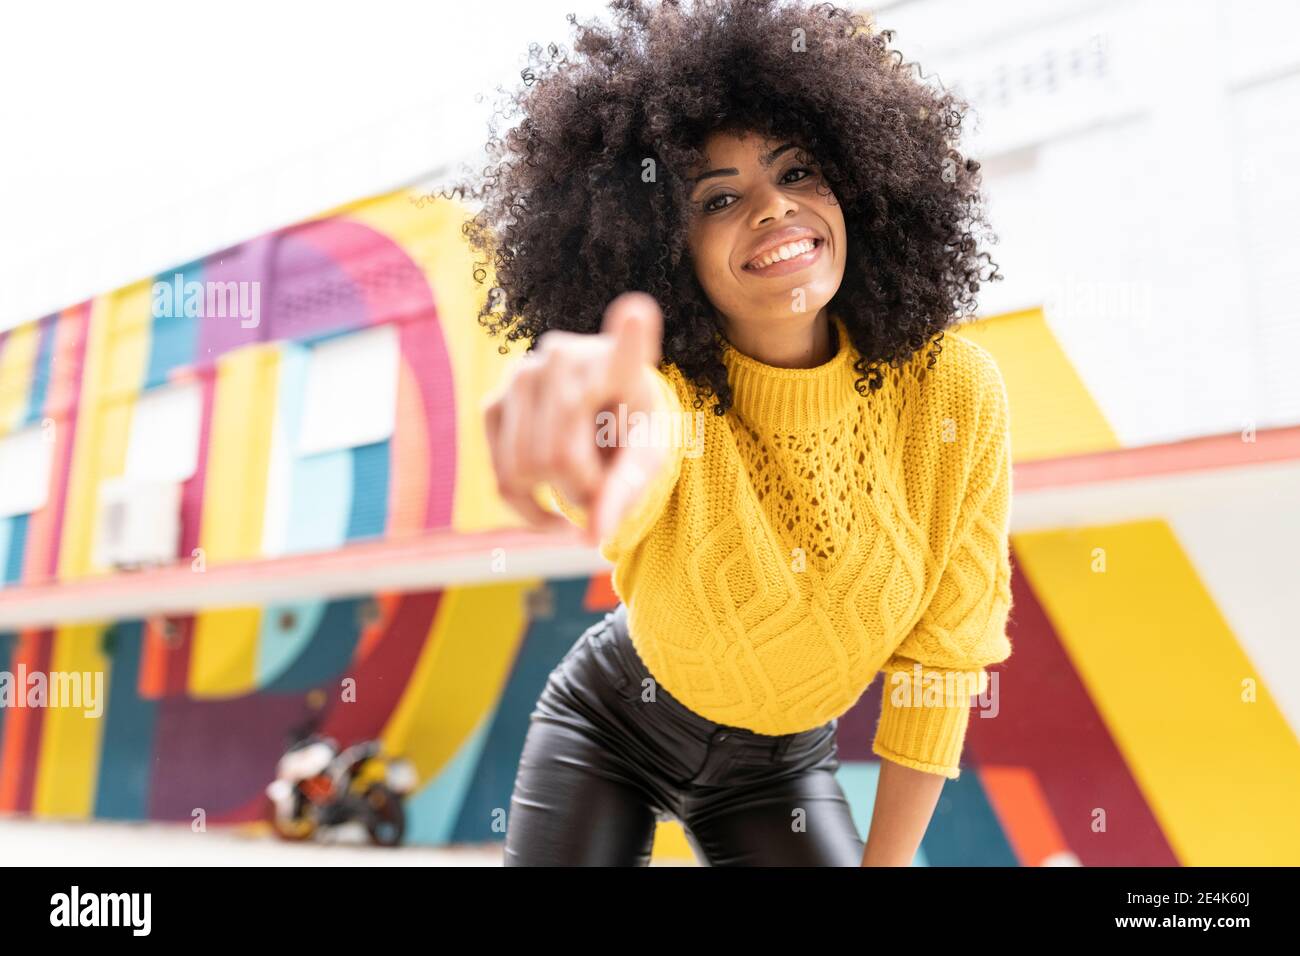 Smiling woman pointing finger while standing outdoors Stock Photo